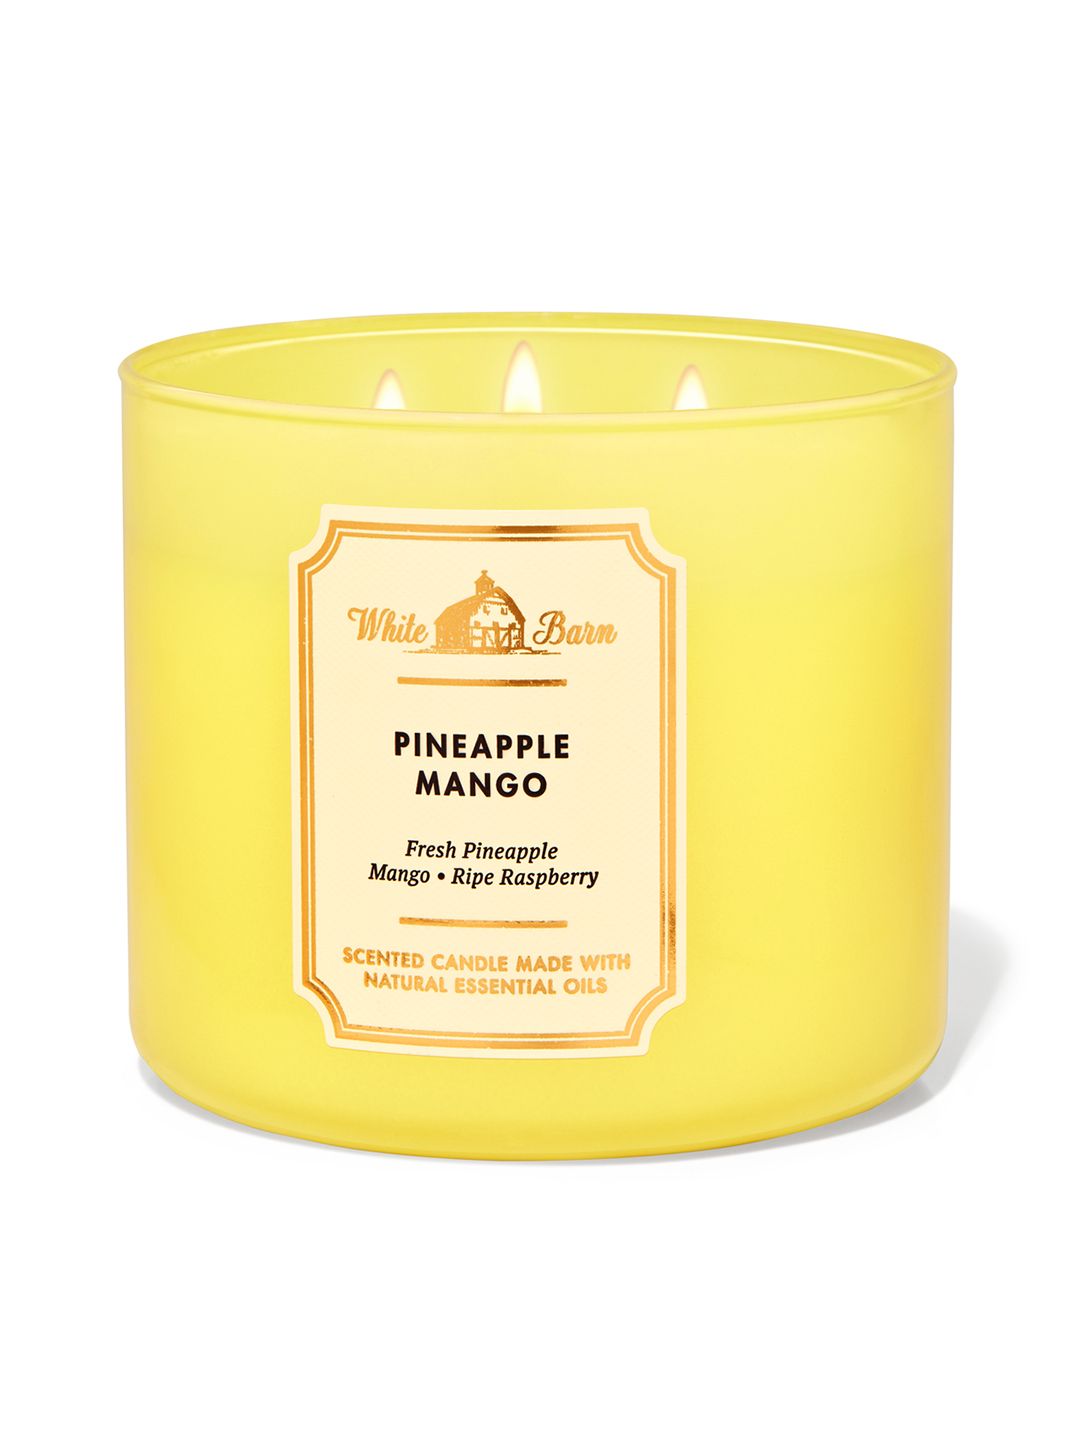 Bath & Body Works Pineapple Mango 3-Wick Scented Candle - 421 g Price in India